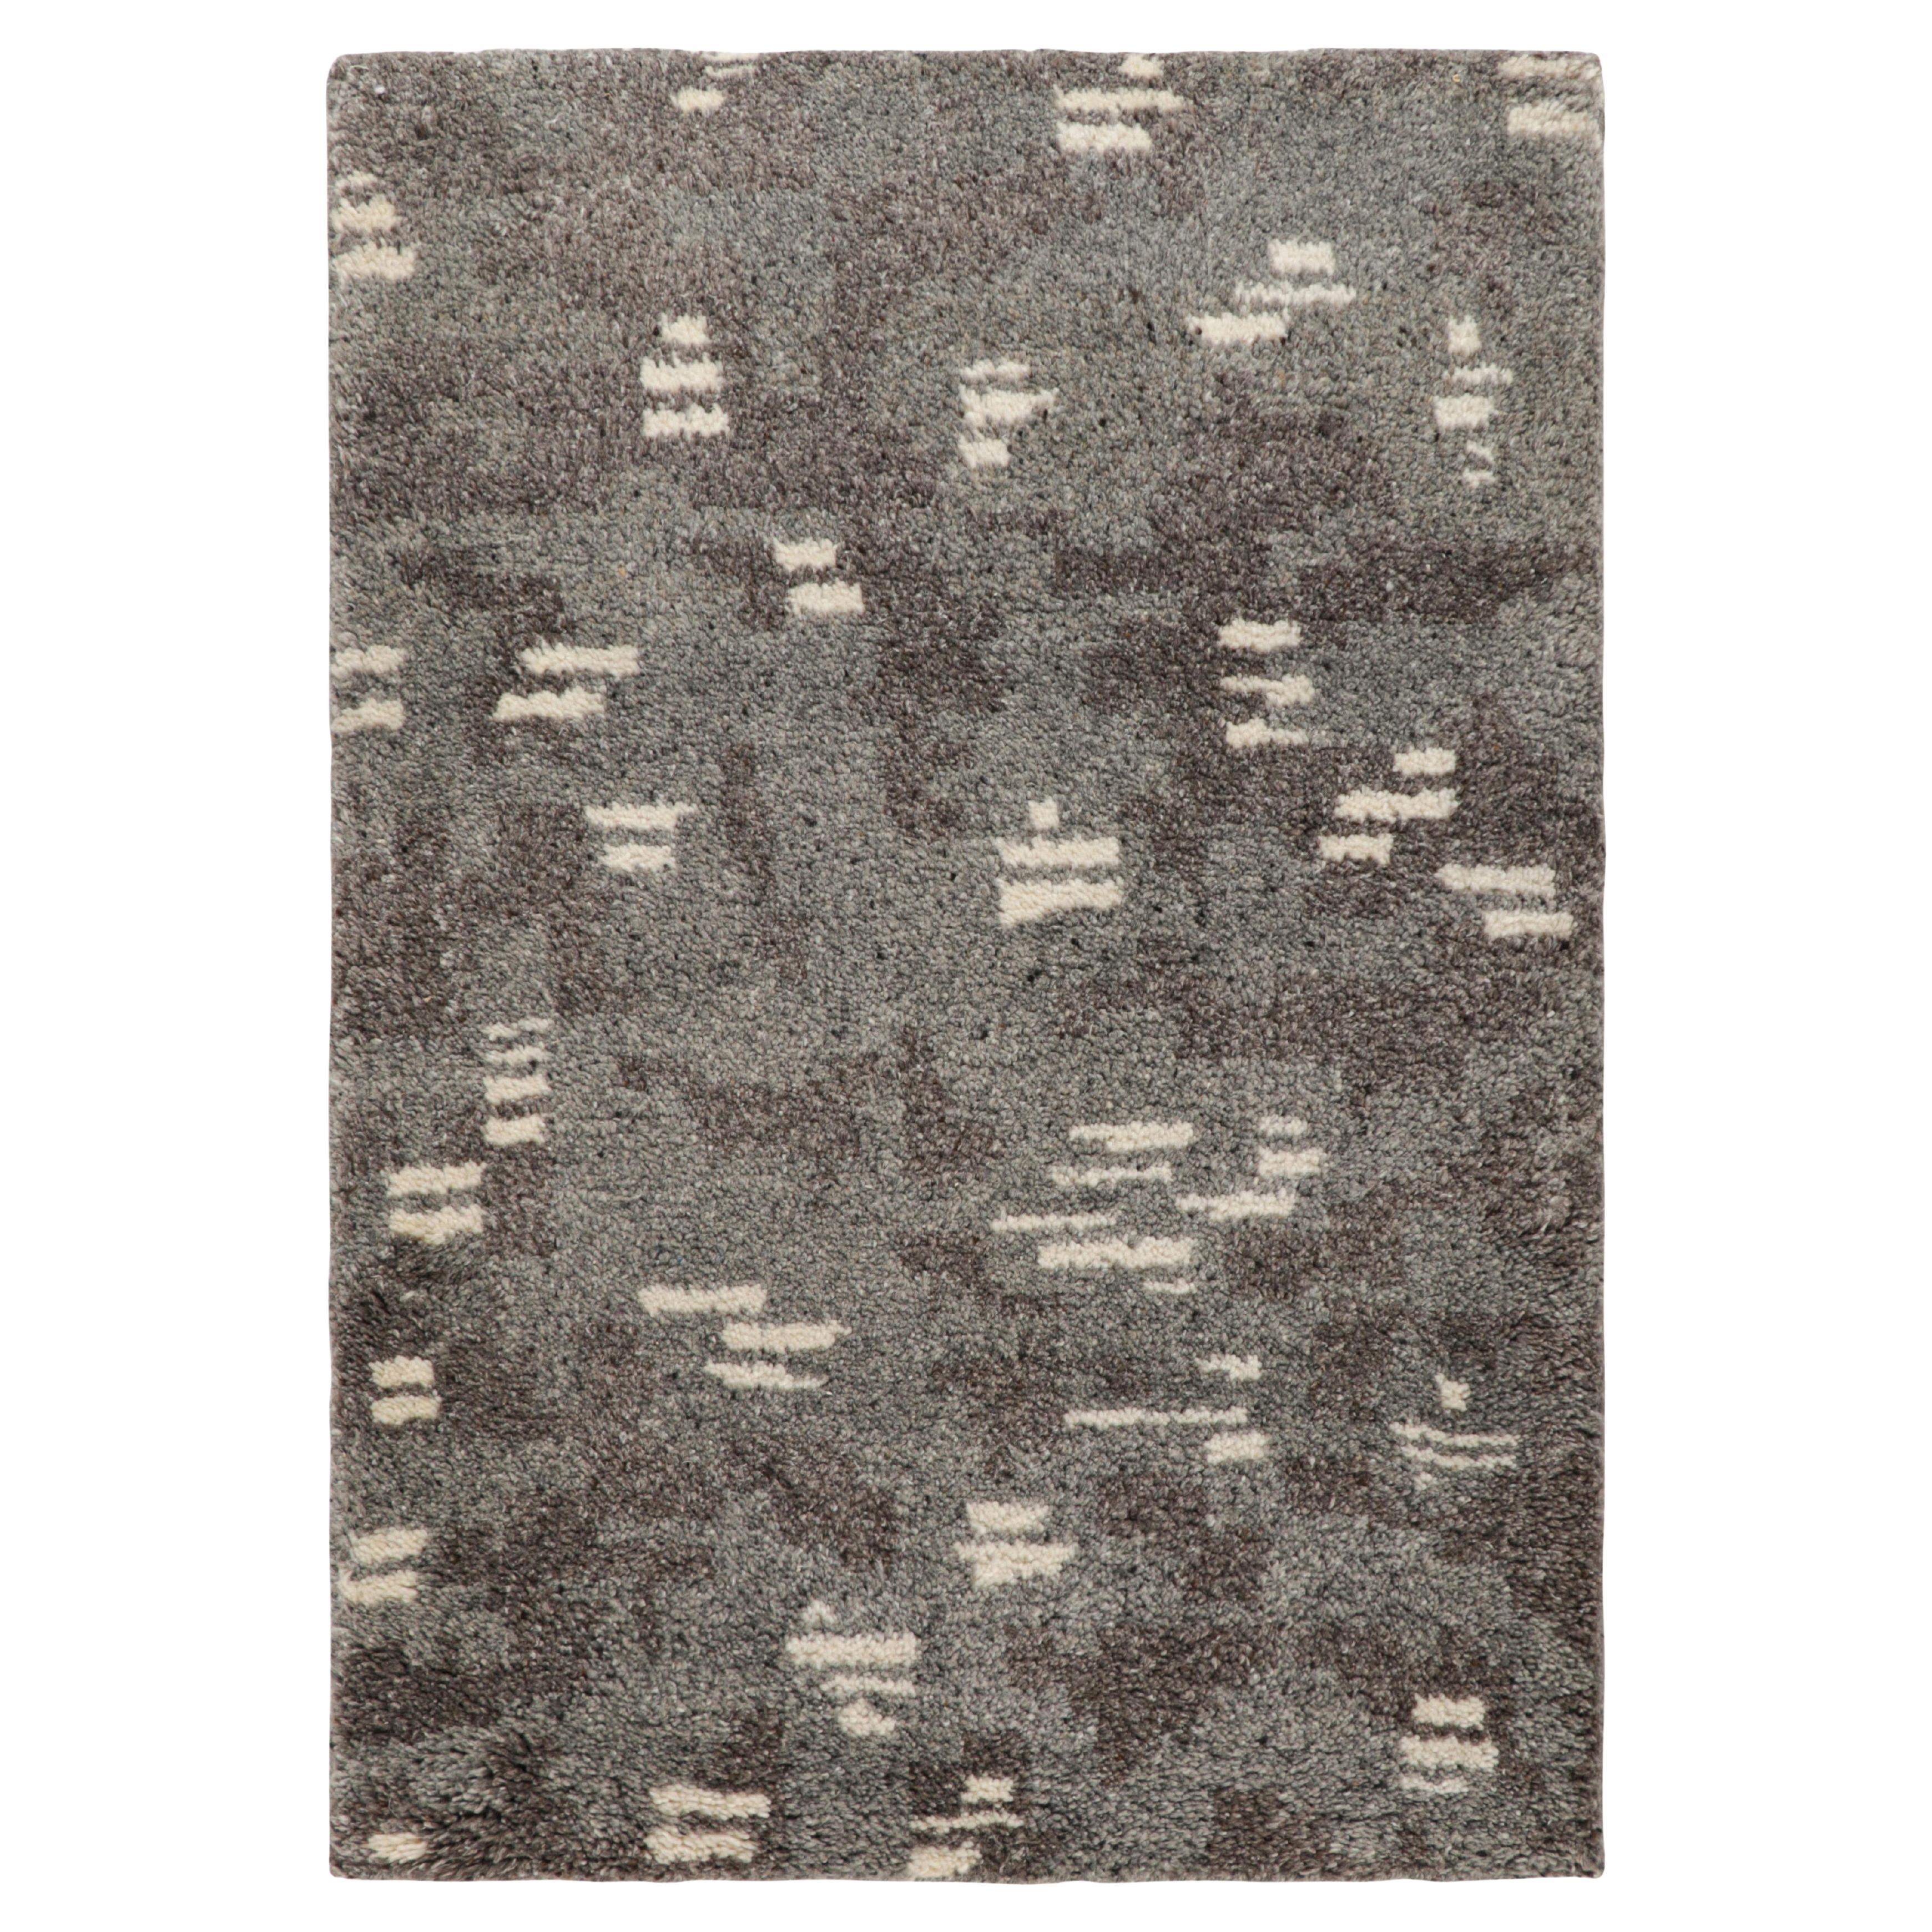 Rug & Kilim’s Modern Rug in Charcoal Gray with White Geometric Patterns